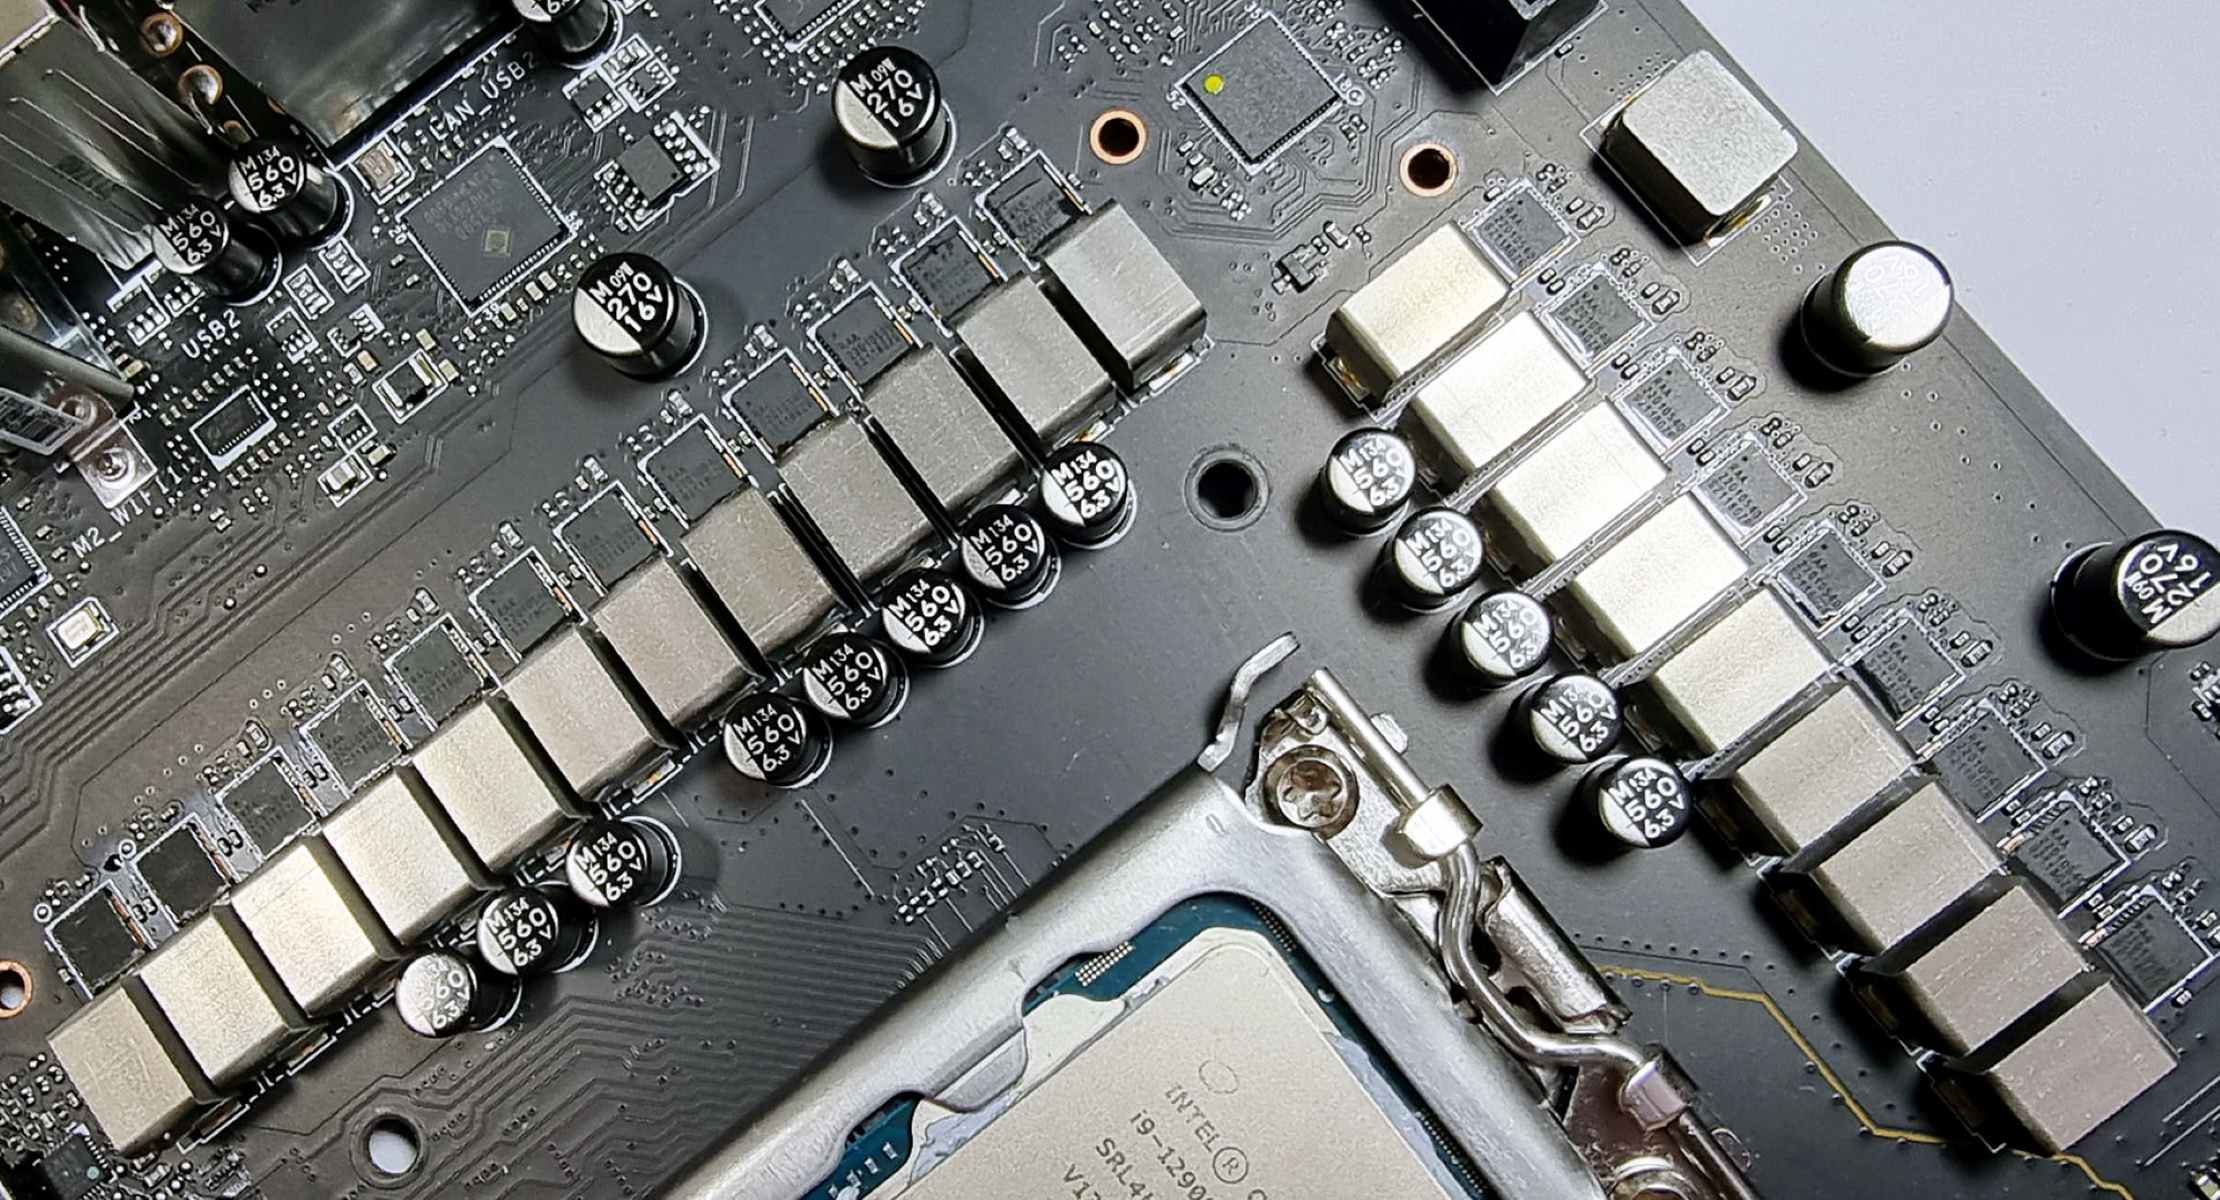 What Is Vrm On Motherboard